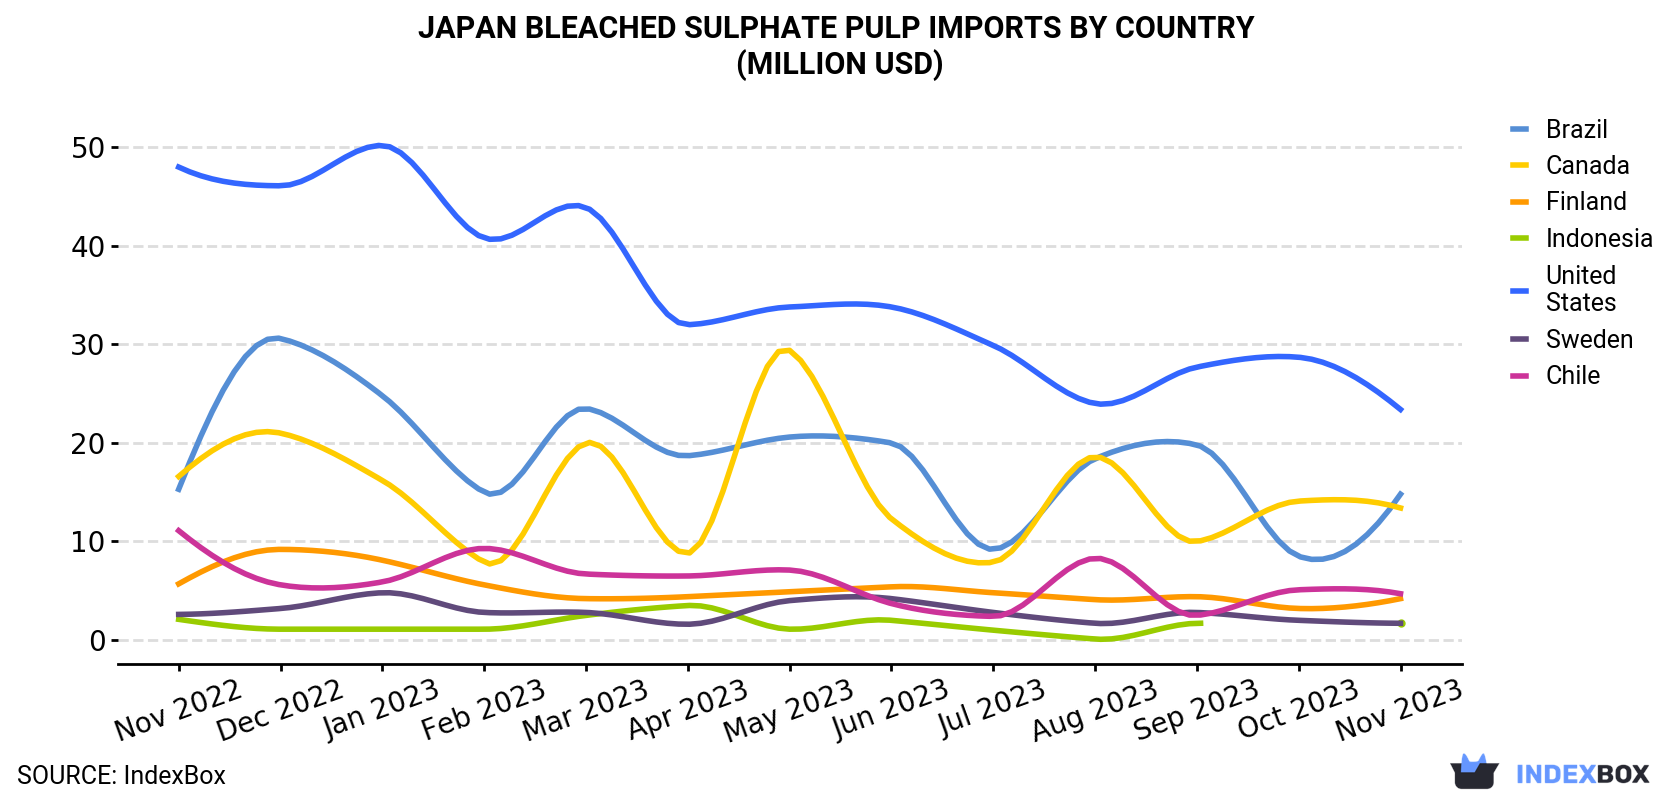 Japan Bleached Sulphate Pulp Imports By Country (Million USD)